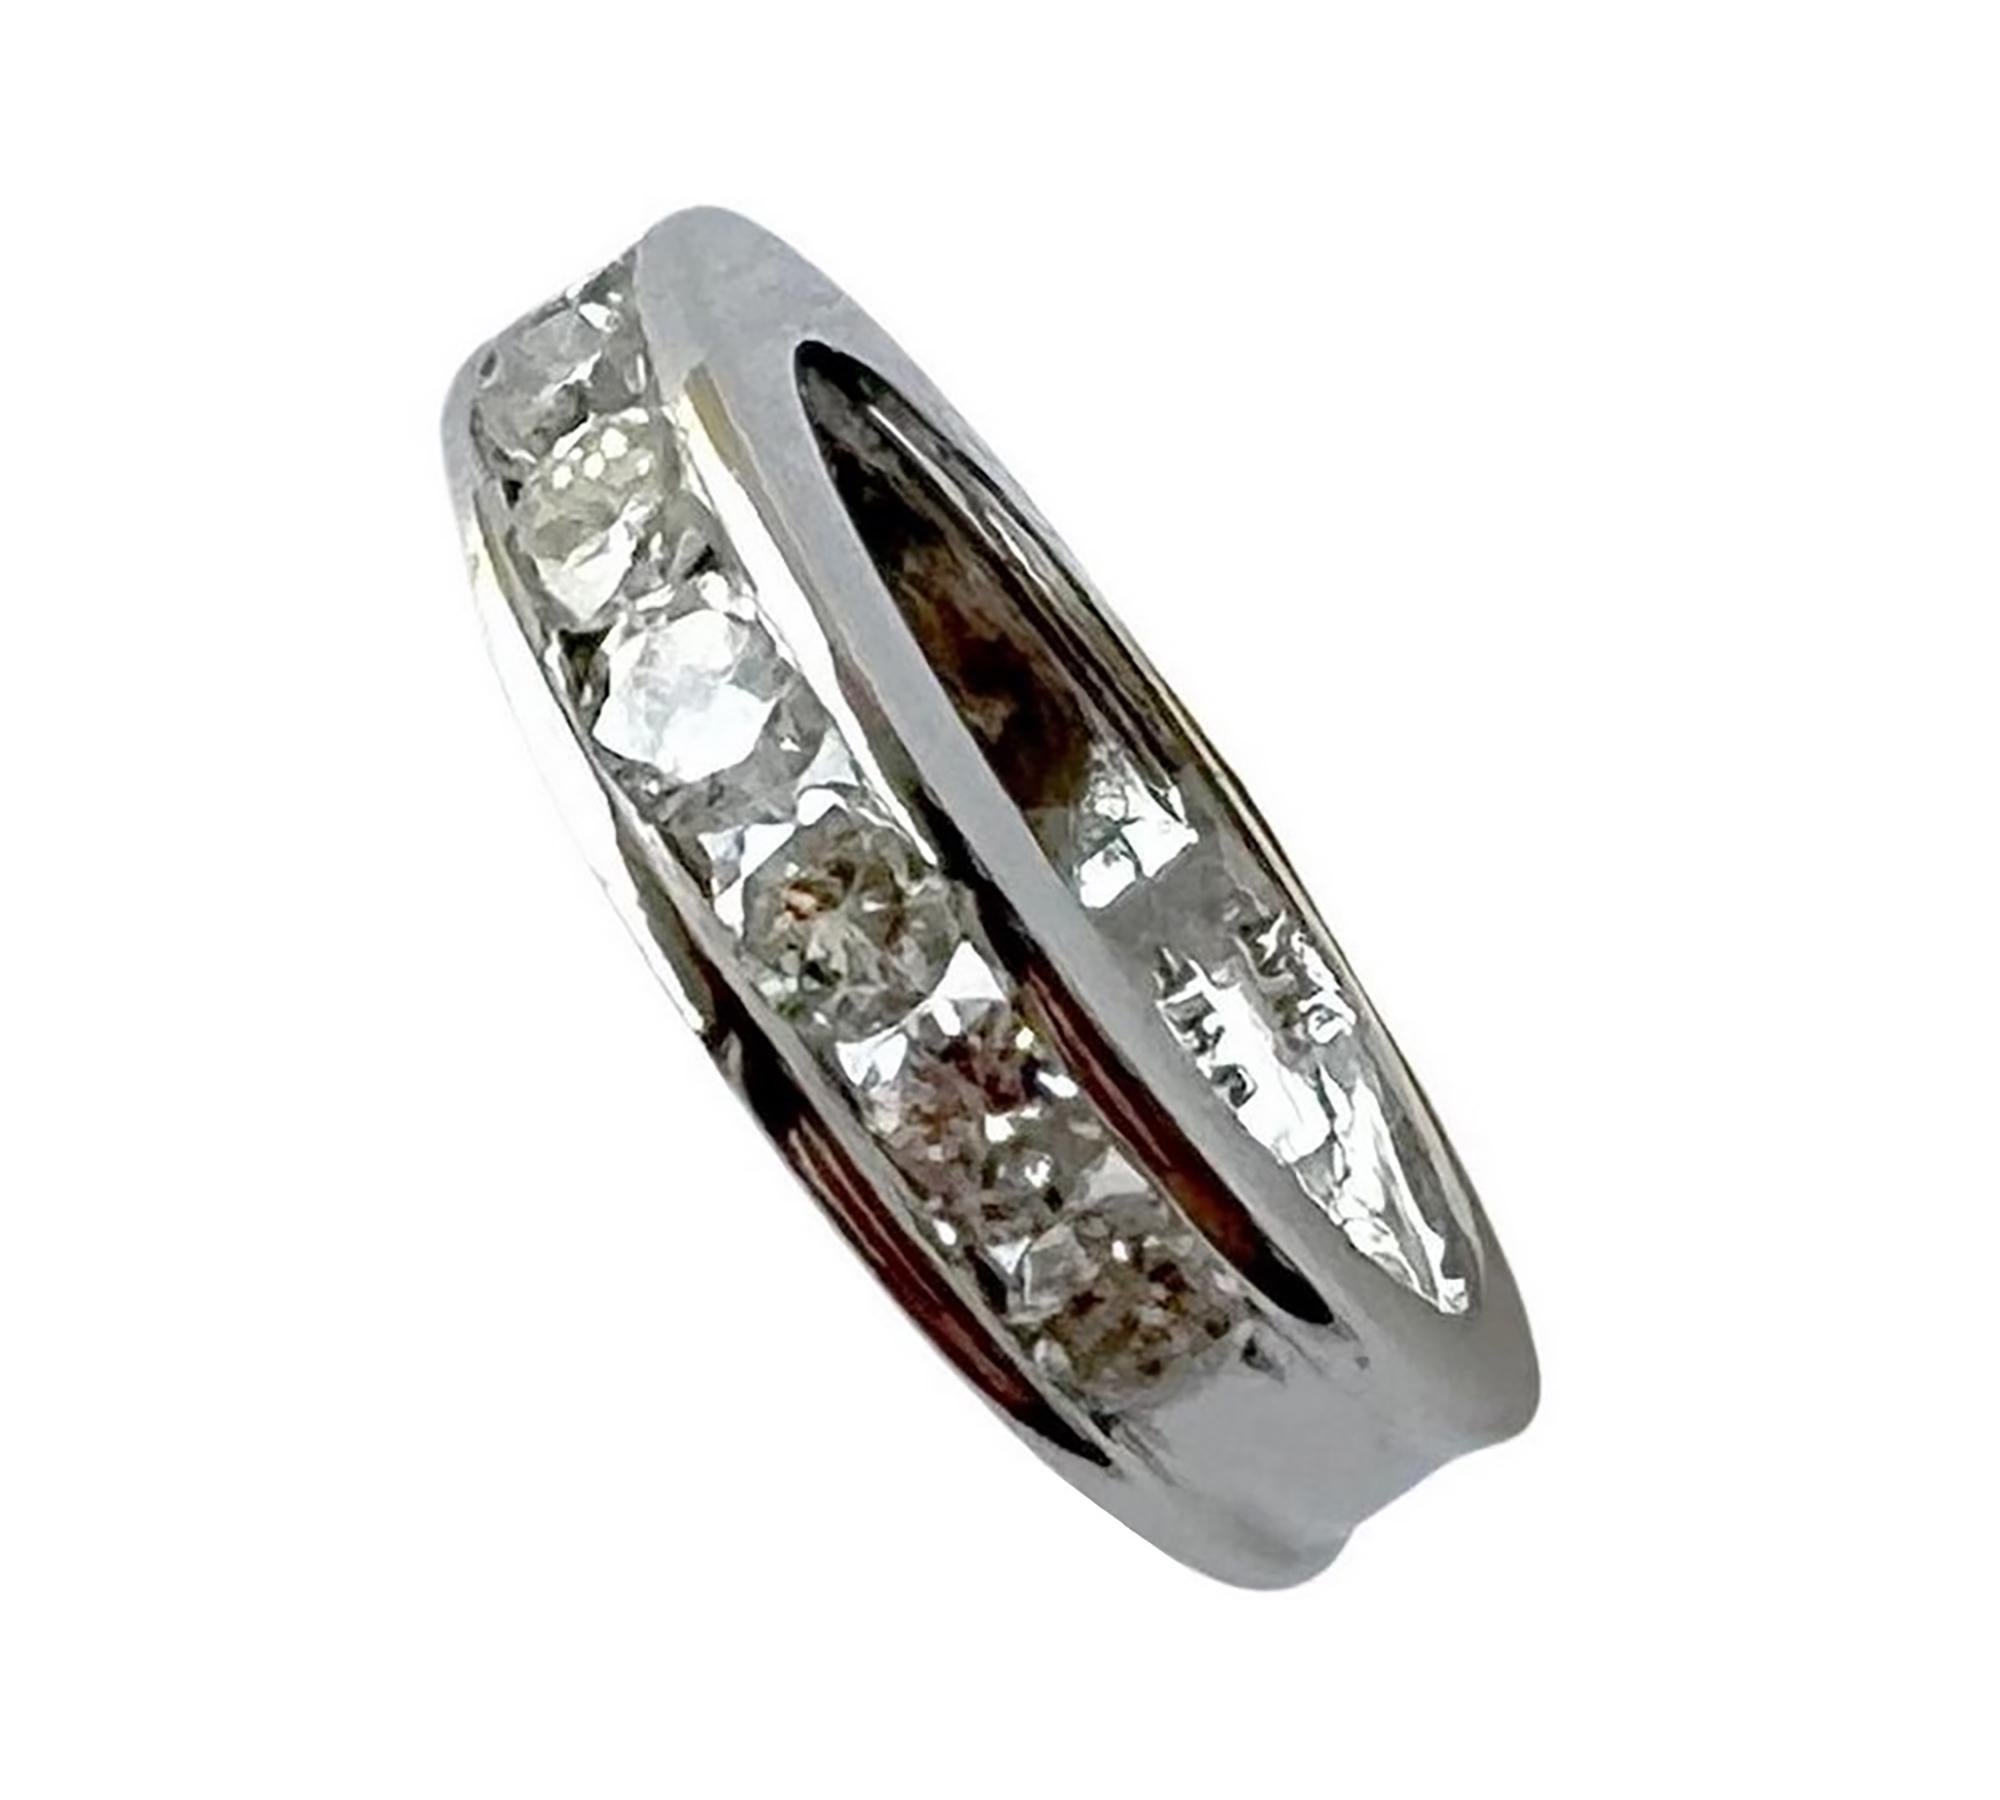 Stunning platinum and diamond semi eternity band ring circa 1990s. Ring is a finger size 6 and features seven icy white round diamonds channel set in a highly polished platinum half circle setting. The diamonds are round in shape, near colorless,